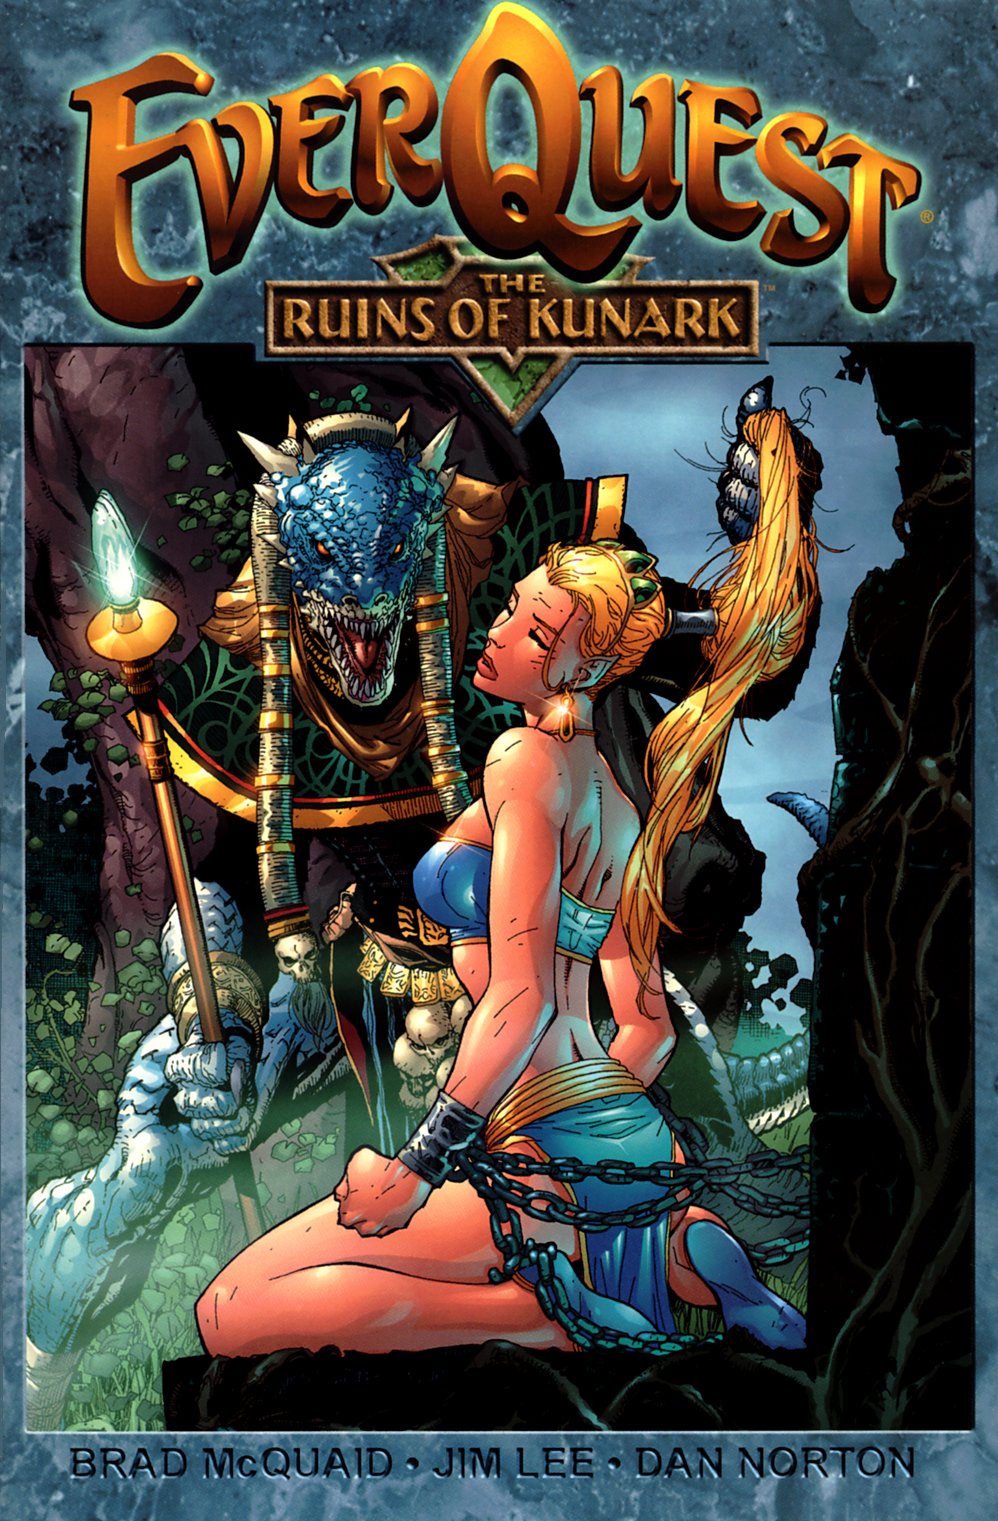 Read online Everquest: The Ruins of Kunark comic -  Issue # Full - 1